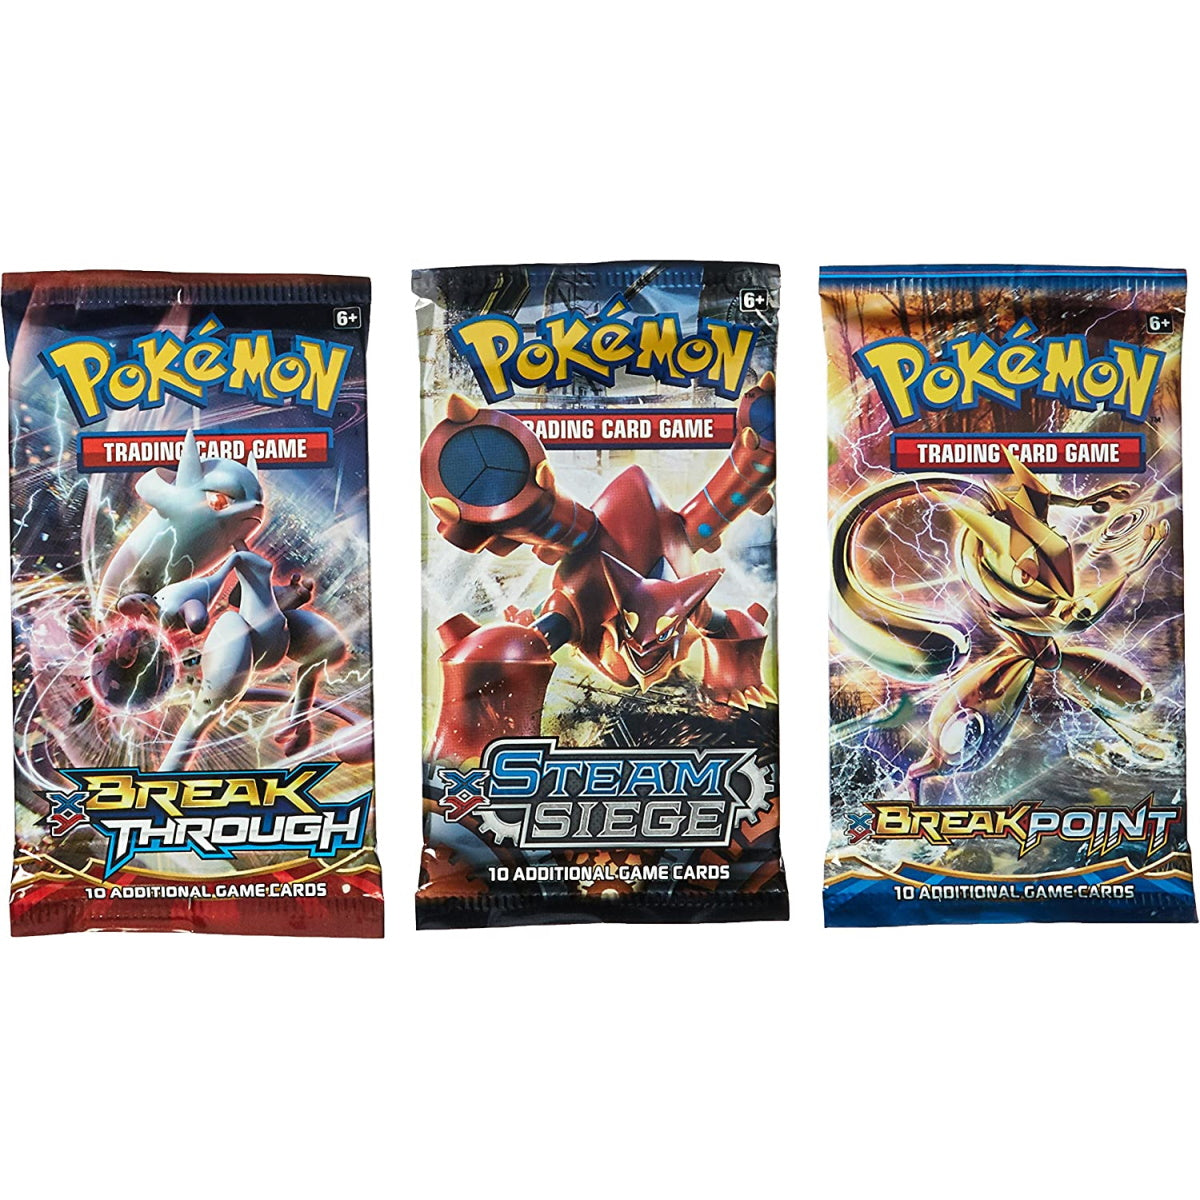 Pokemon TCG: 3 Booster Packs - 30 Cards Total| Value Pack Includes 3 Blister Packs of Random Cards | 100% Authentic Branded Pokemon Expansion Packs | Random Chance at Rares & Holofoils - image 1 of 4